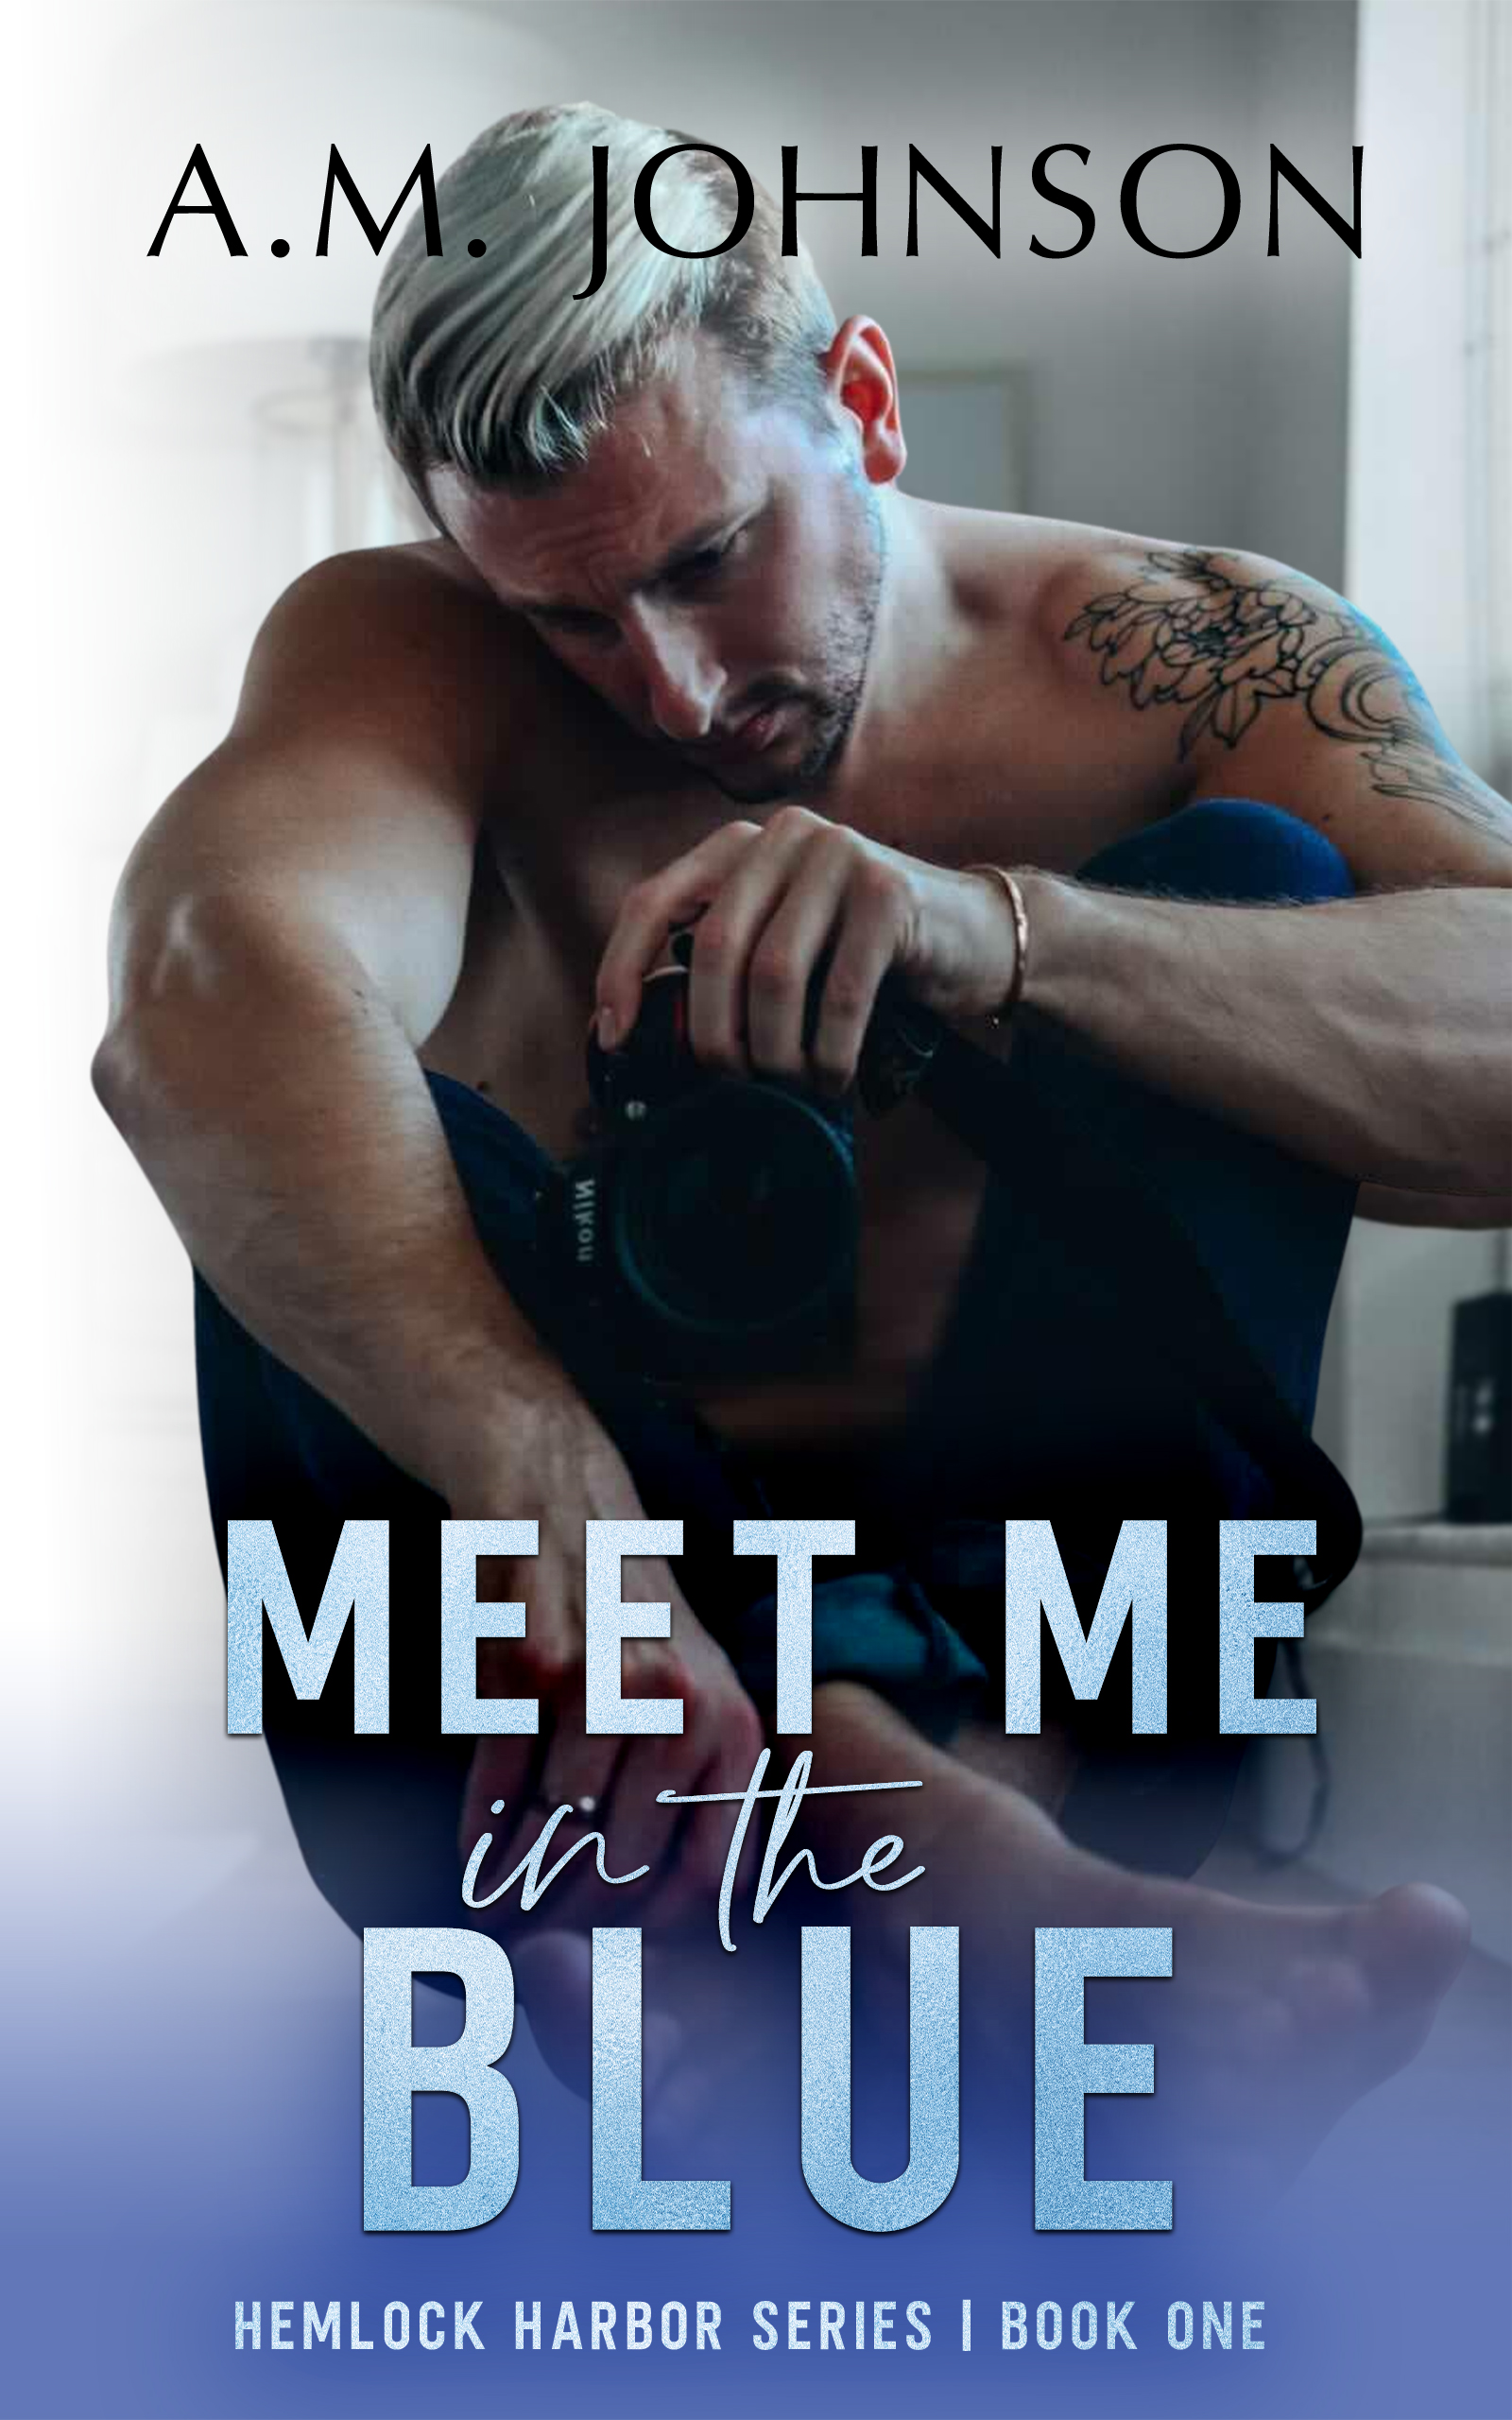 Meet Me in the Blue by A.M. Johnson ePub Download